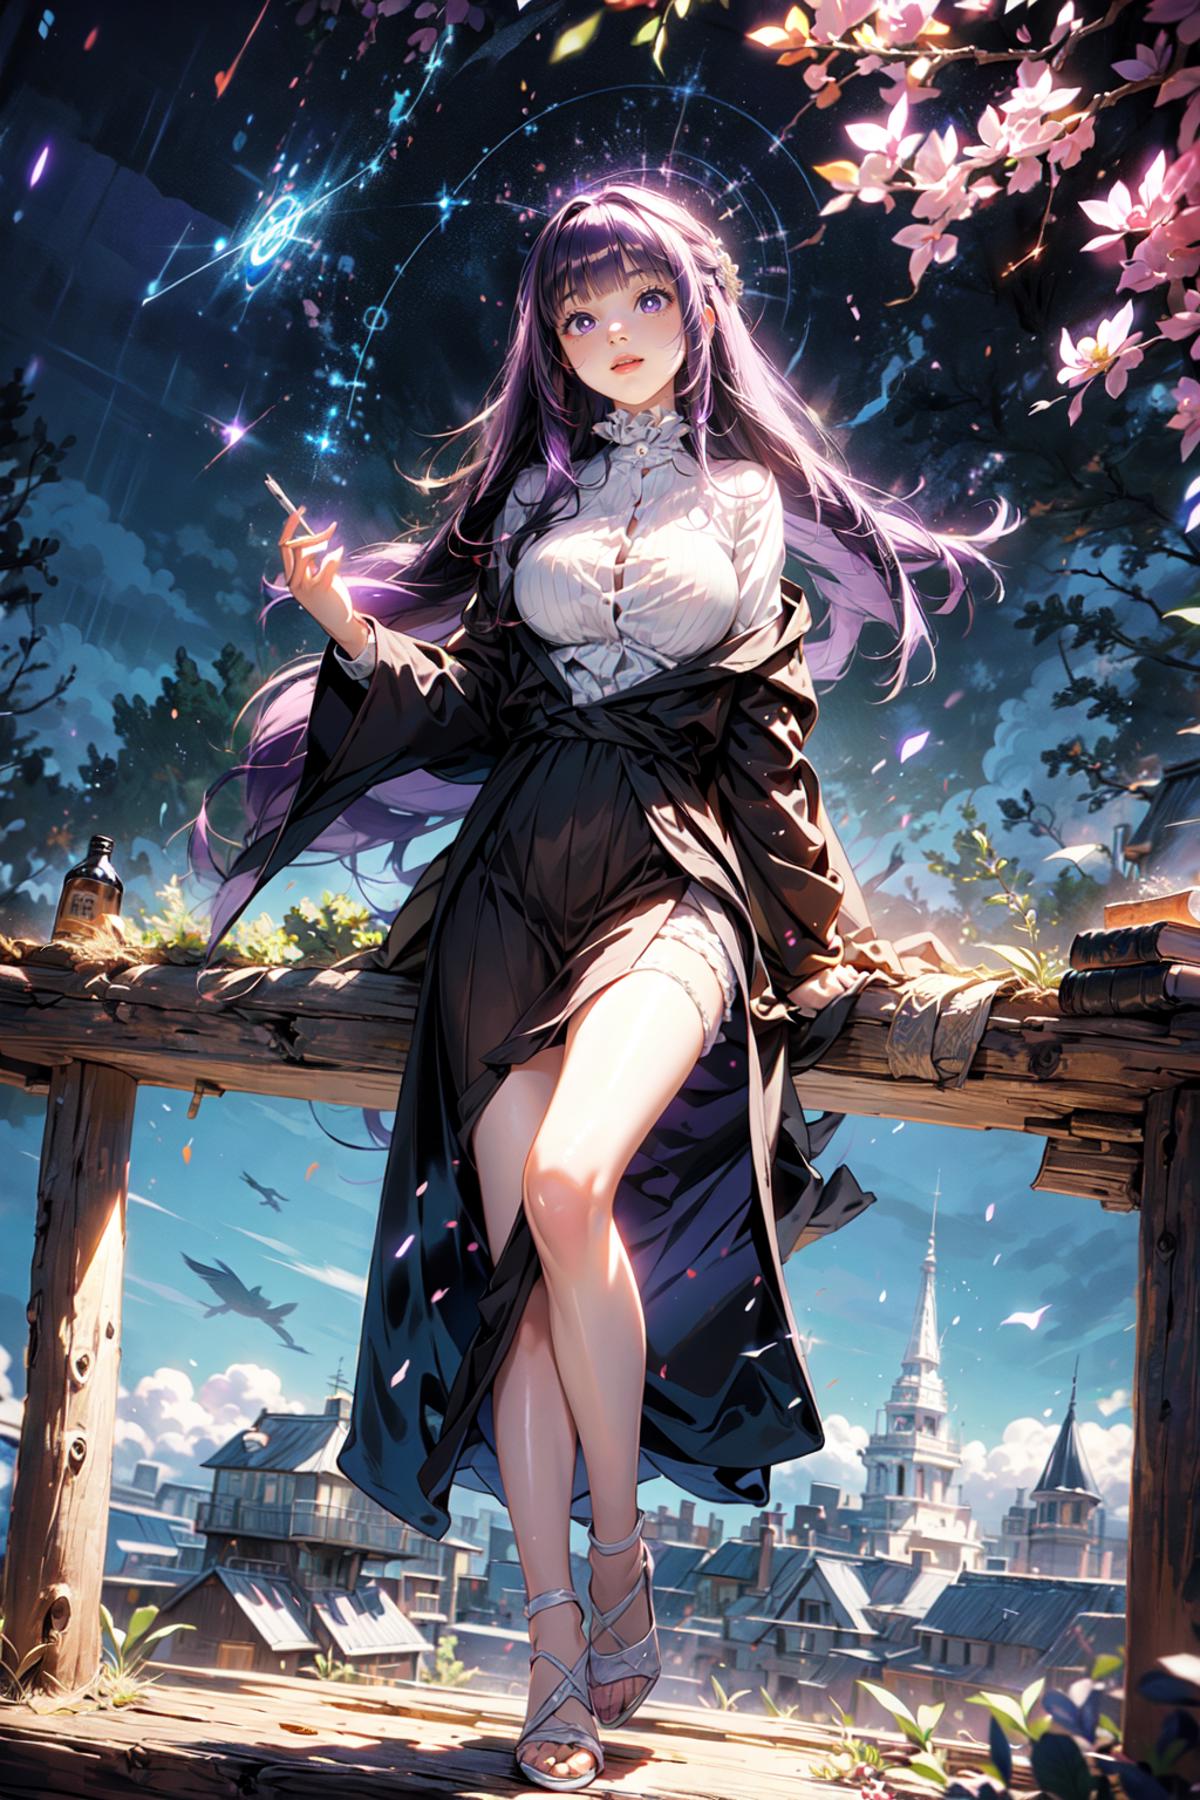 A beautiful anime woman in a flowing coat and white dress stands near a fence.